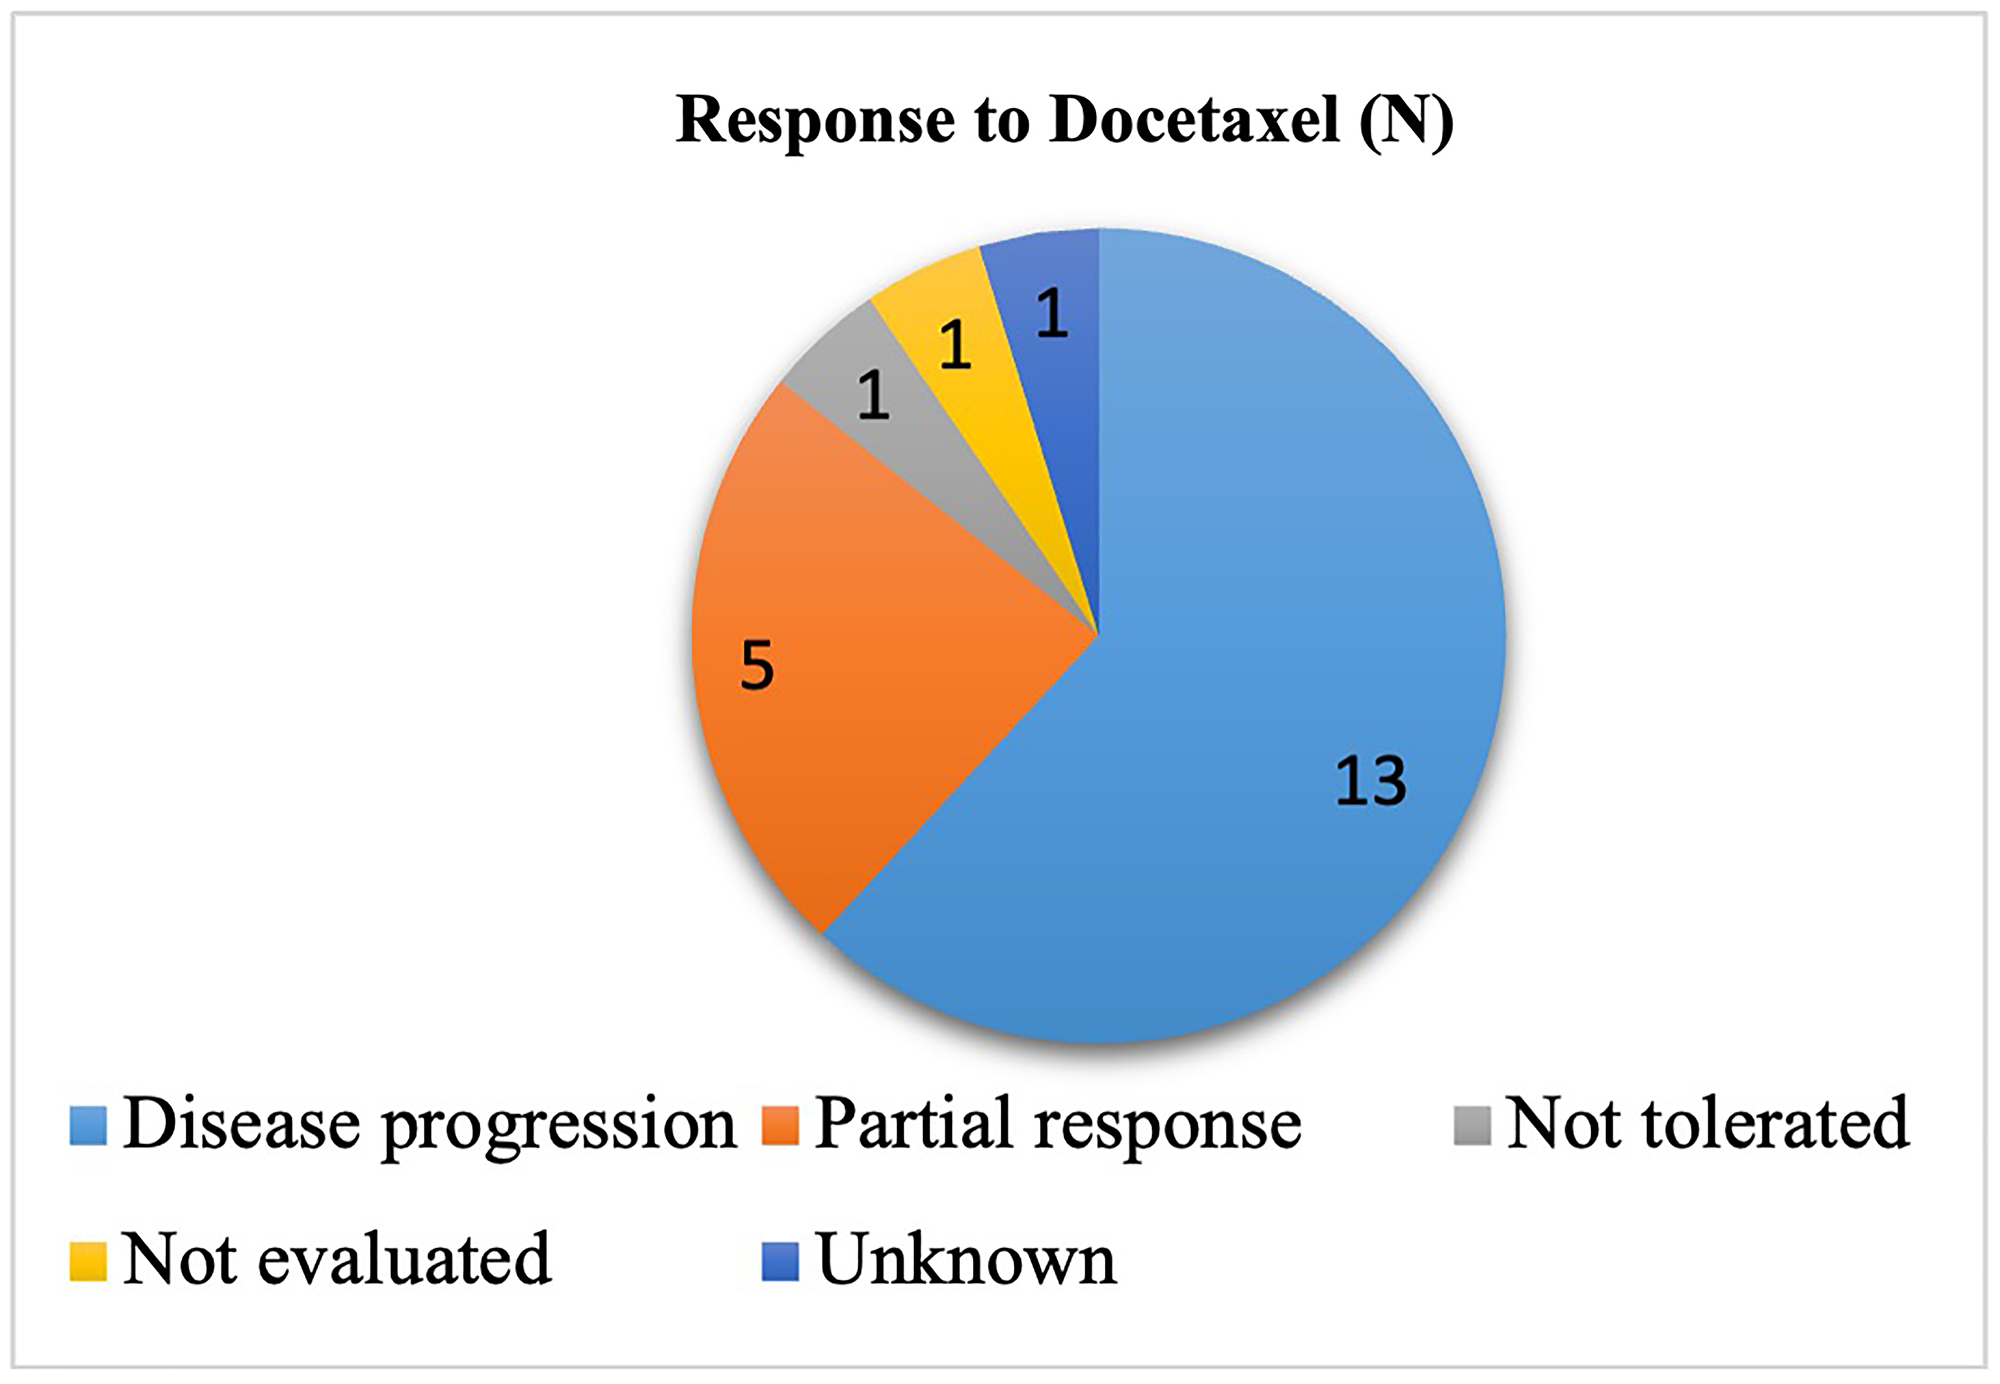 Response to docetaxel in second or third line treatment for non-small cell lung cancer after a treatment with chemo-immunotherapy.